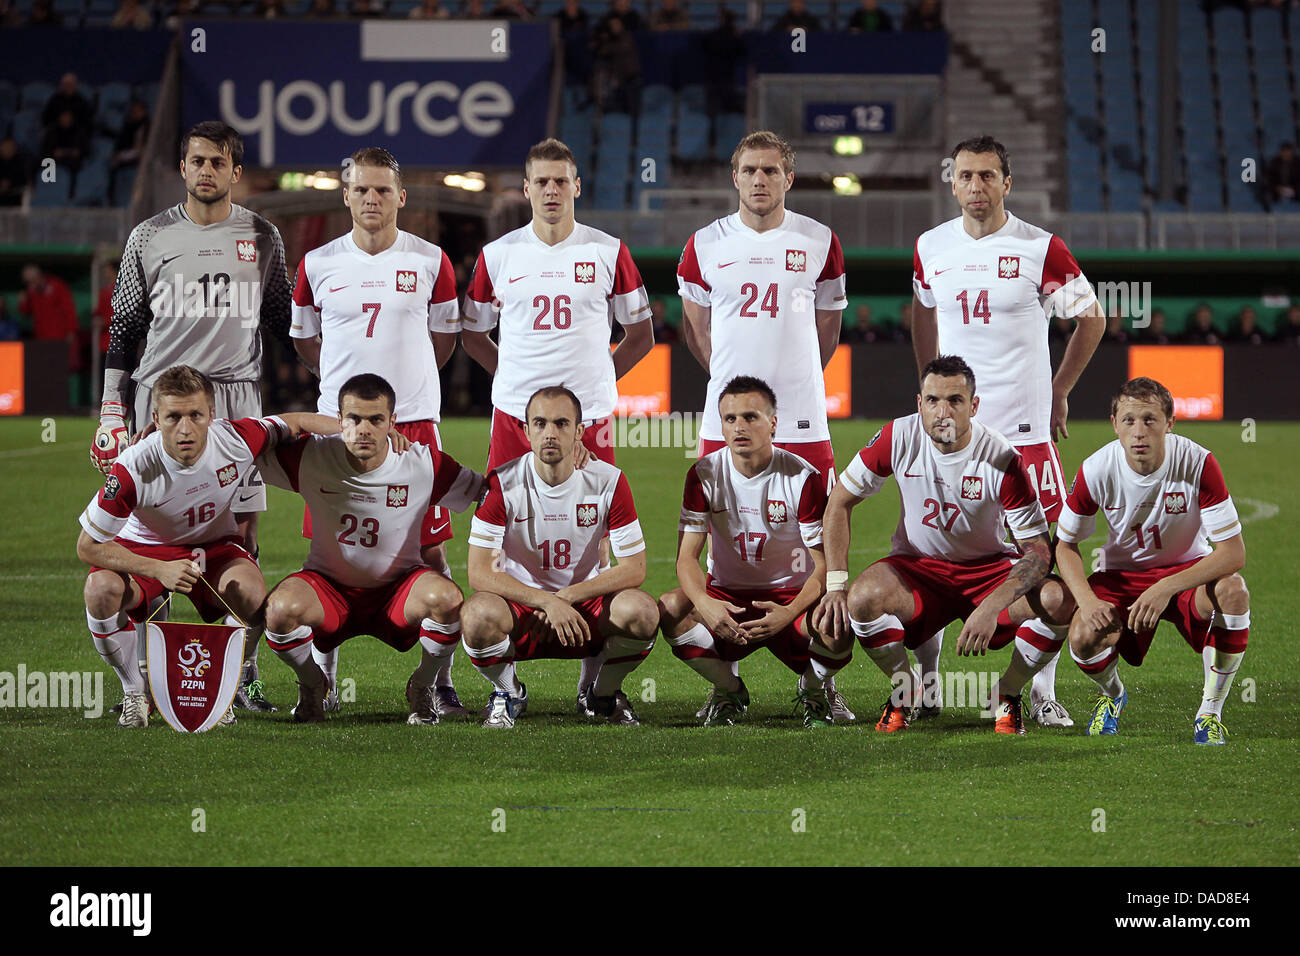 Poland's team pose for a photo during the international friendly soccer match between Poland and Belarus at the Brita Arena in Wiesbaden, Germany, 11 October 2011. Photo: Fredrik von Erichsen dpa/lhe Stock Photo